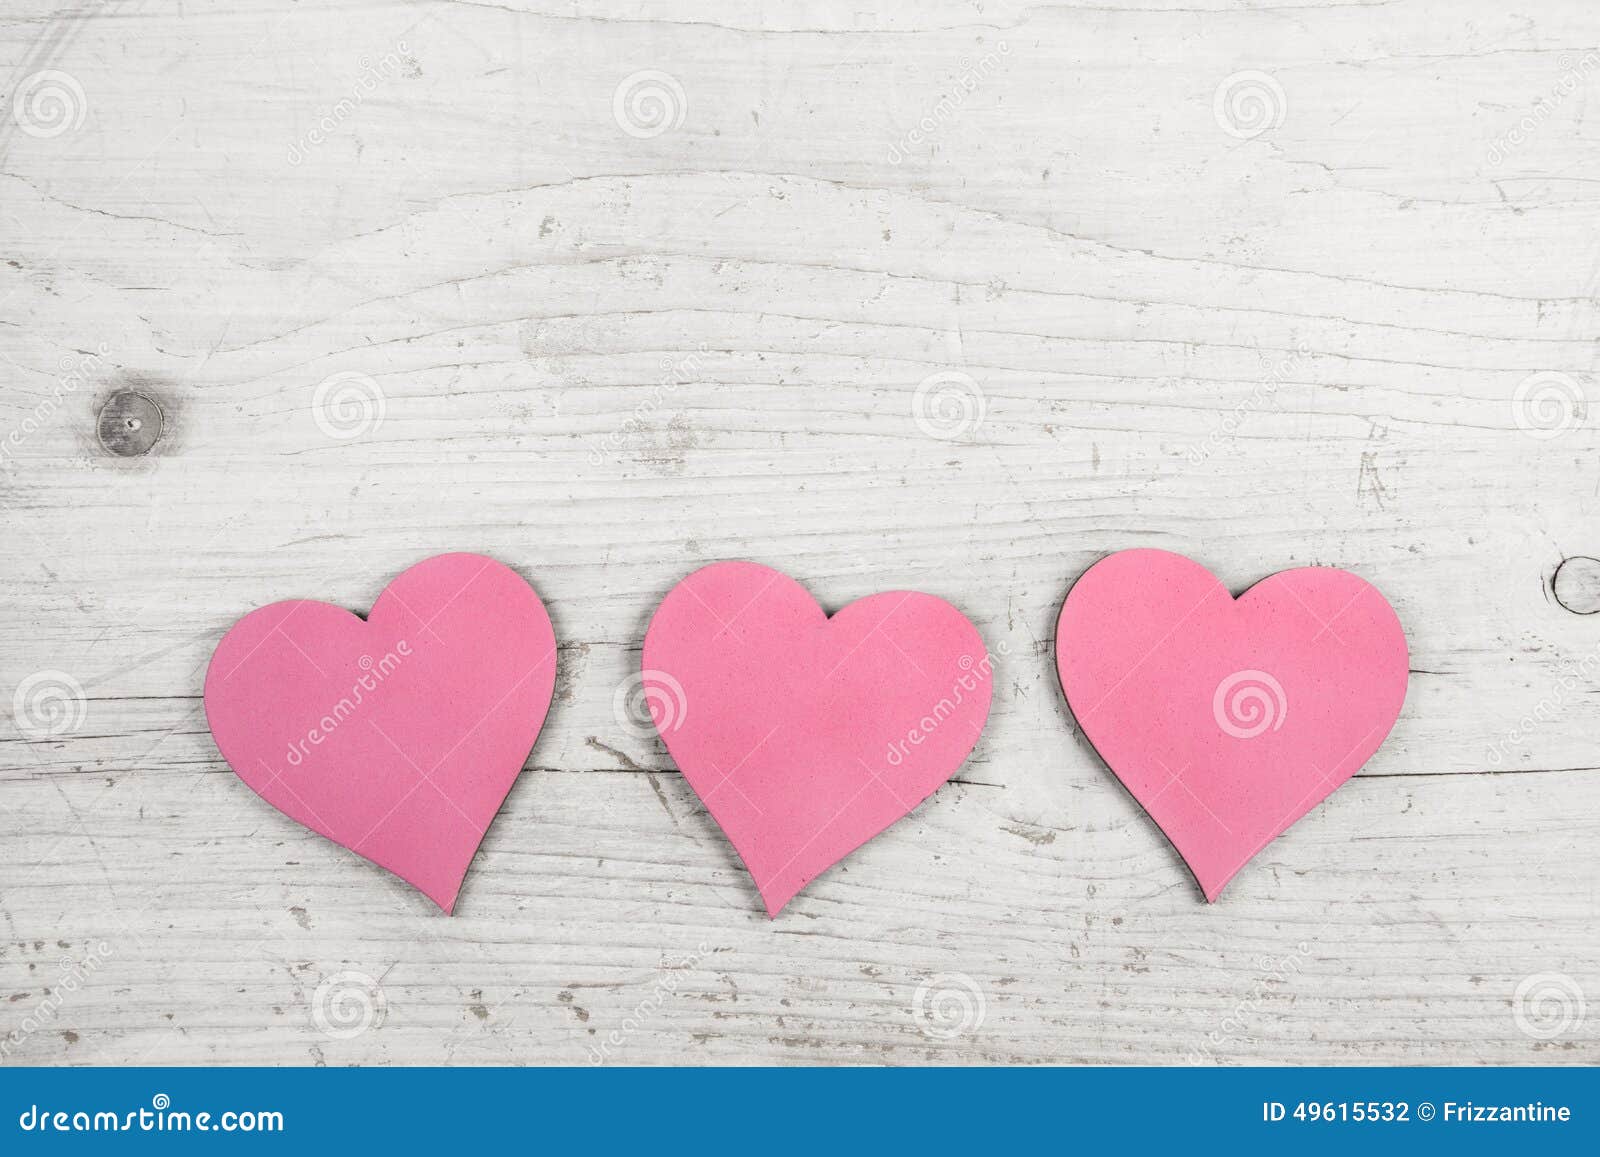 Three pink hearts on old wooden white shabby chic background.